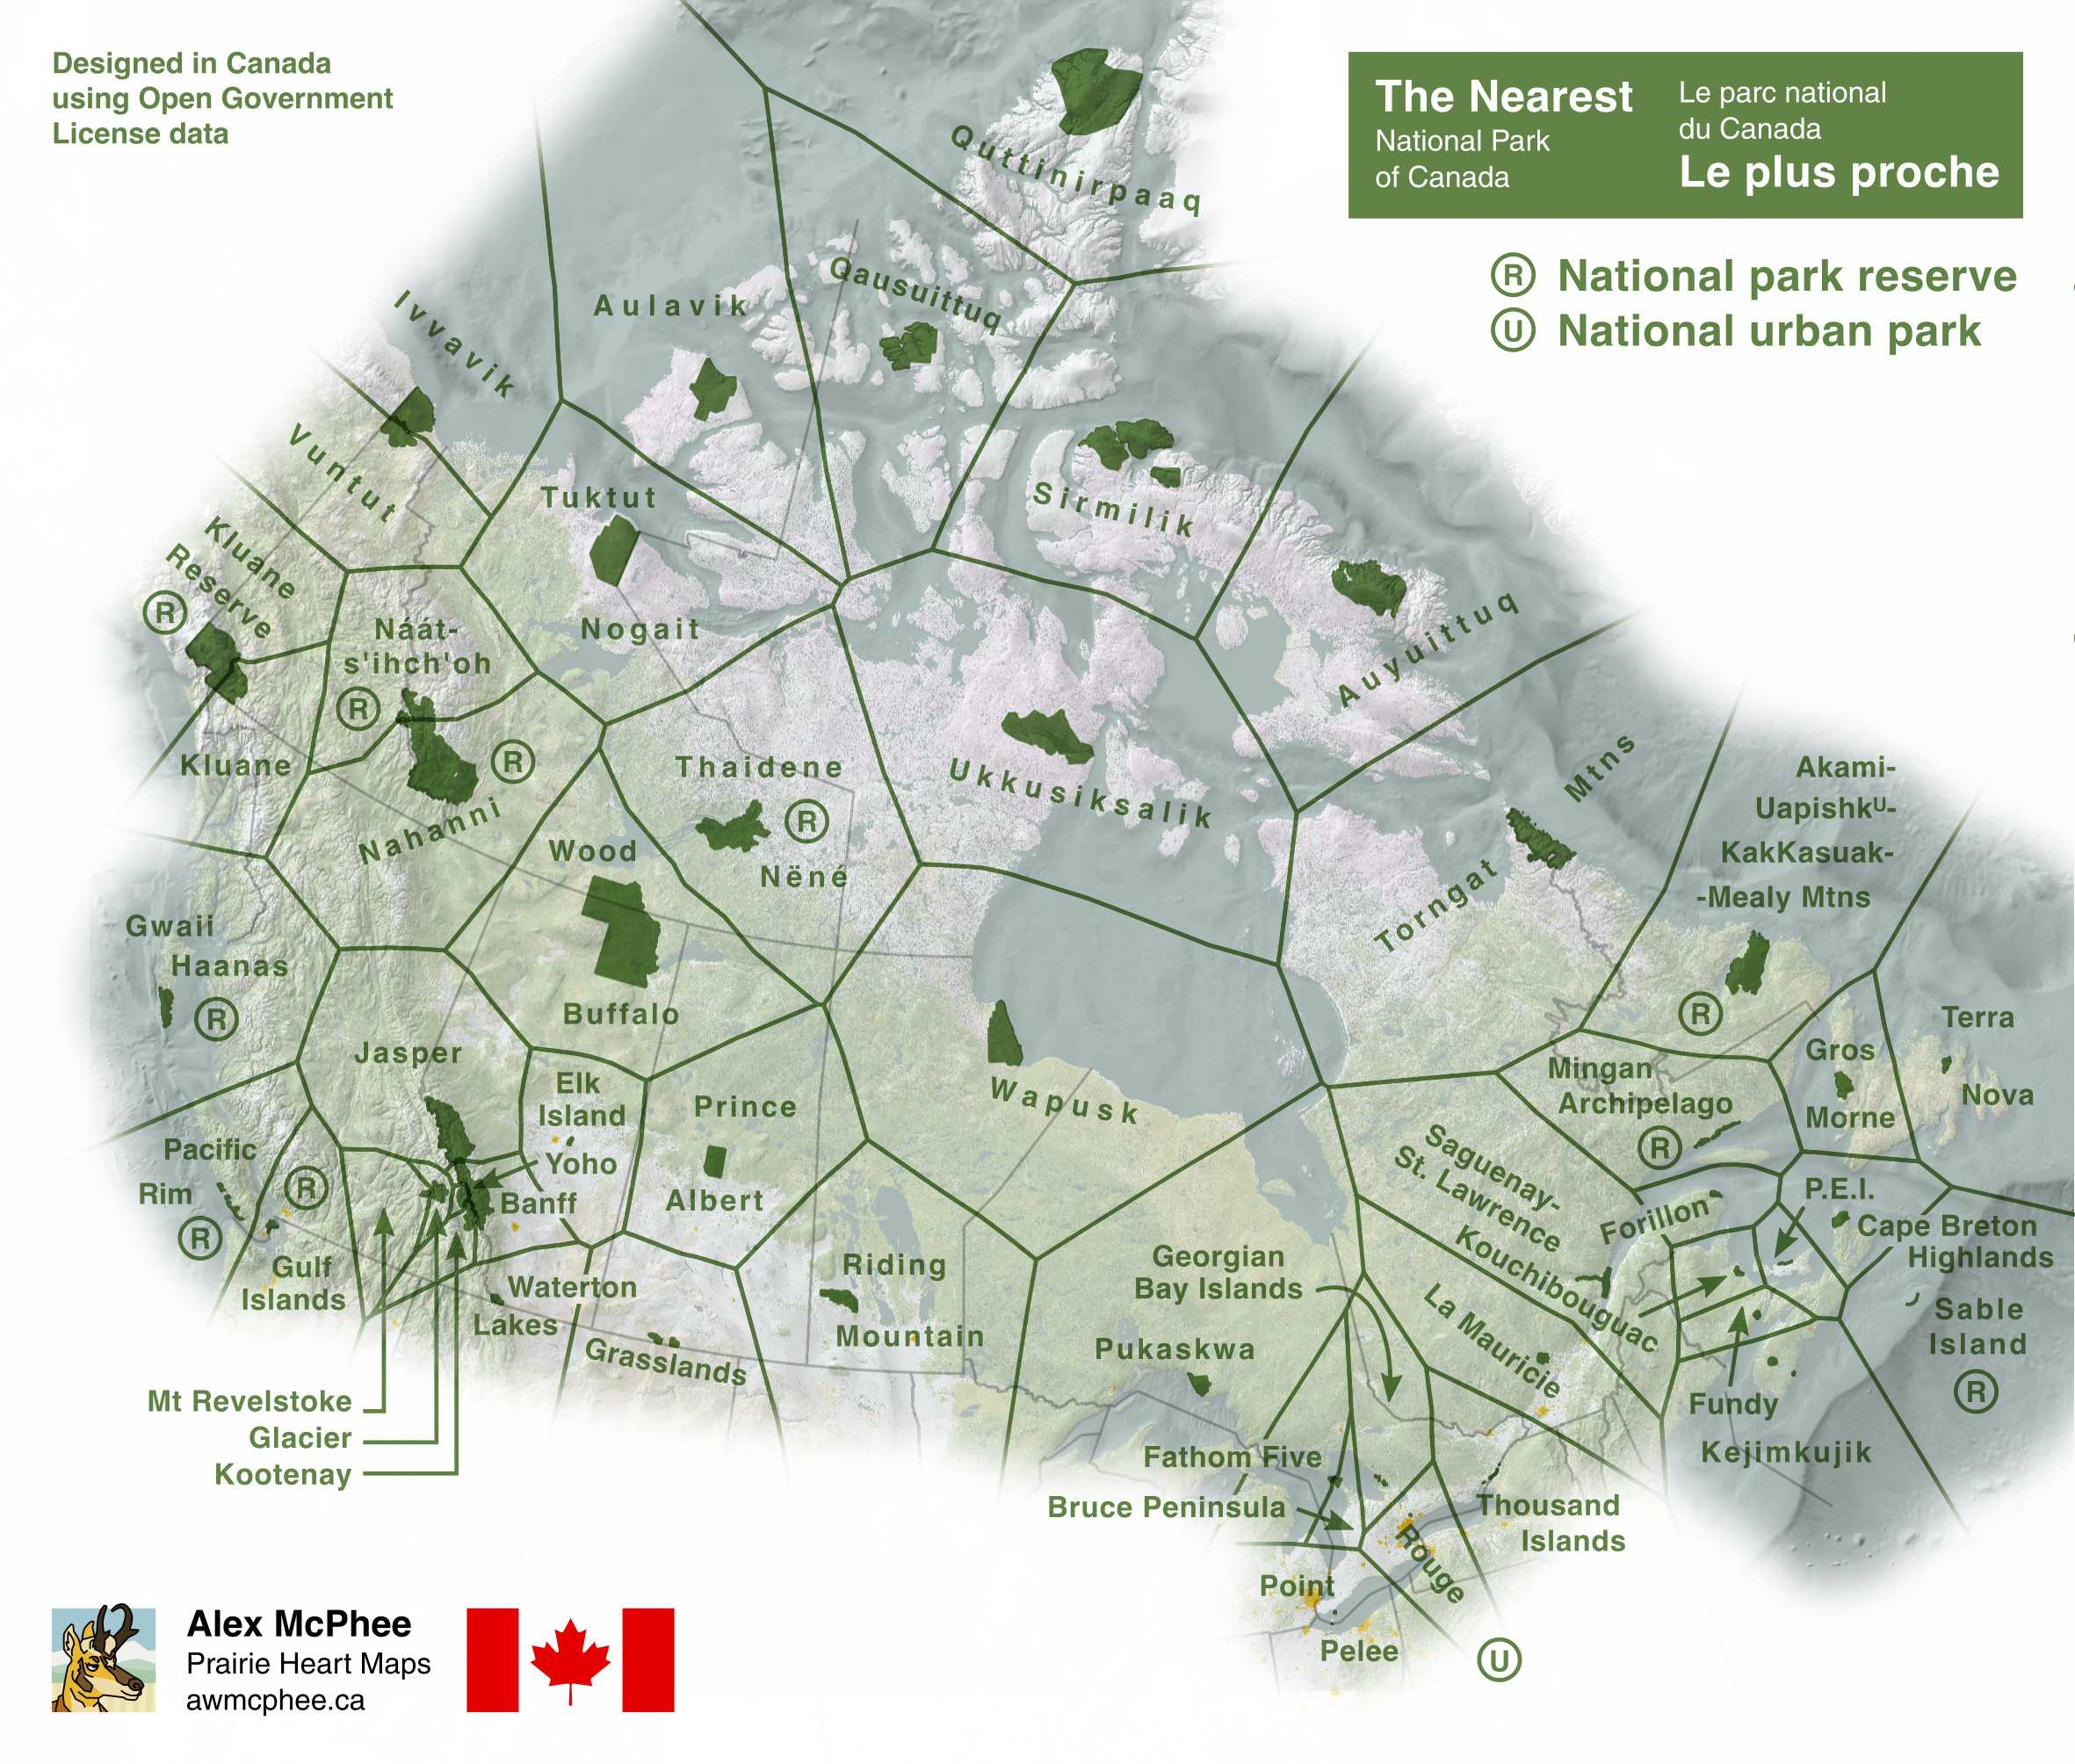 A map of the nearest national park in Canada.